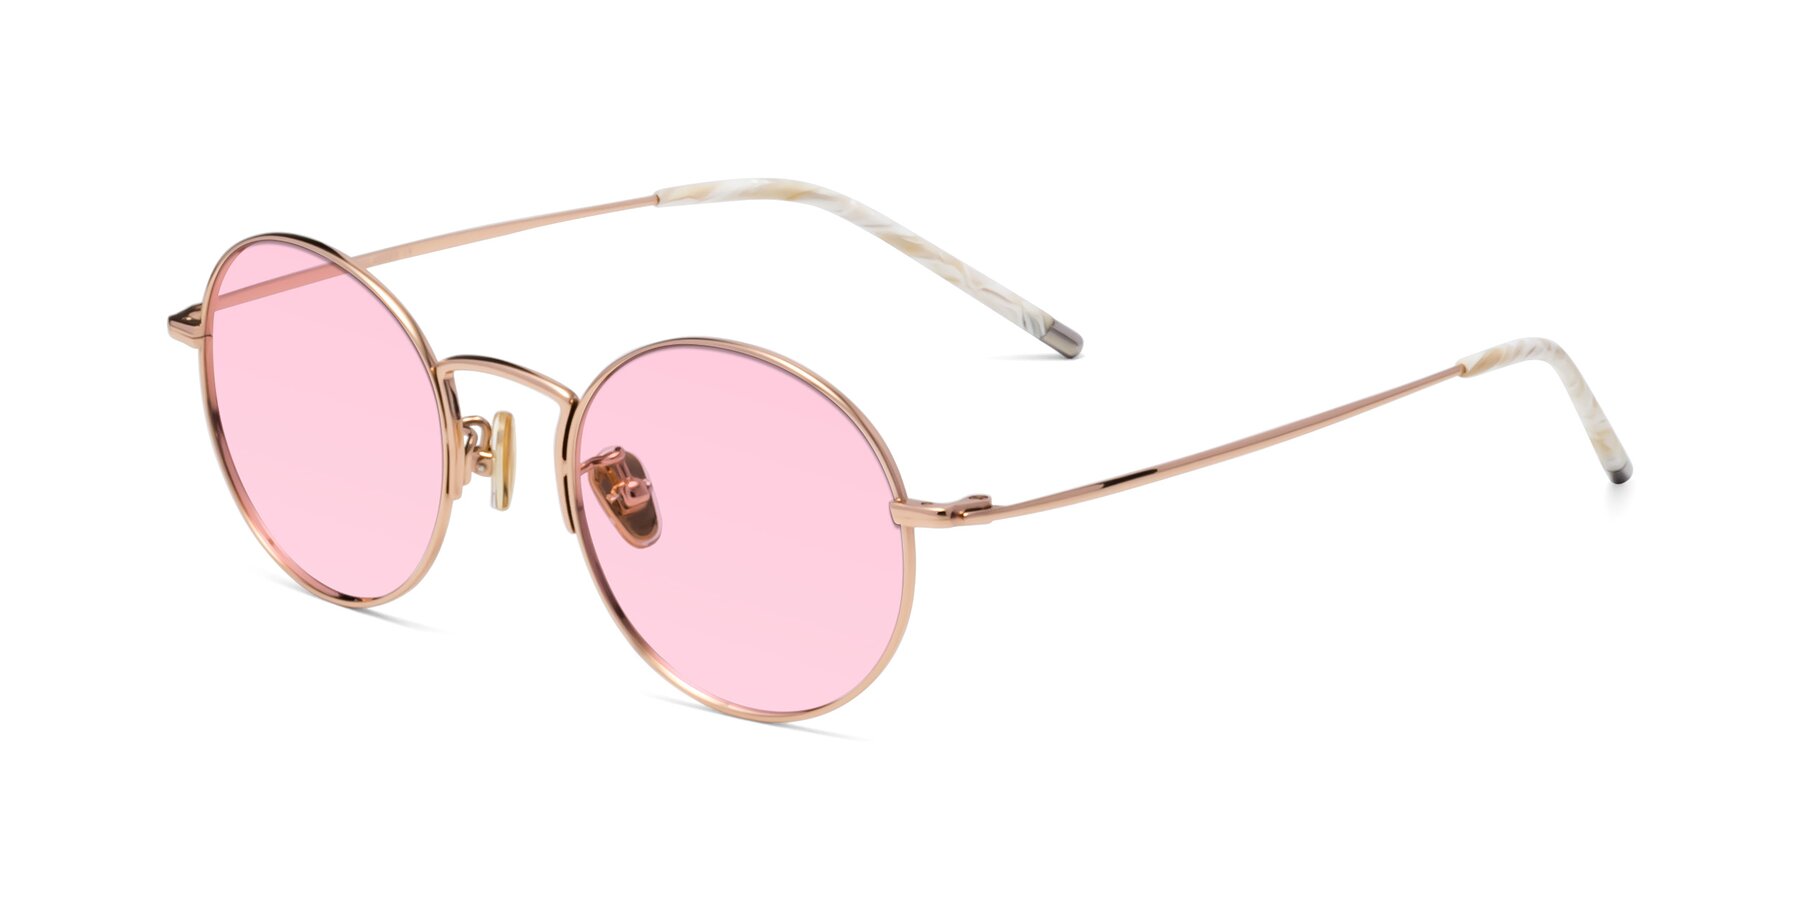 Angle of 80033 in Rose Gold with Light Pink Tinted Lenses